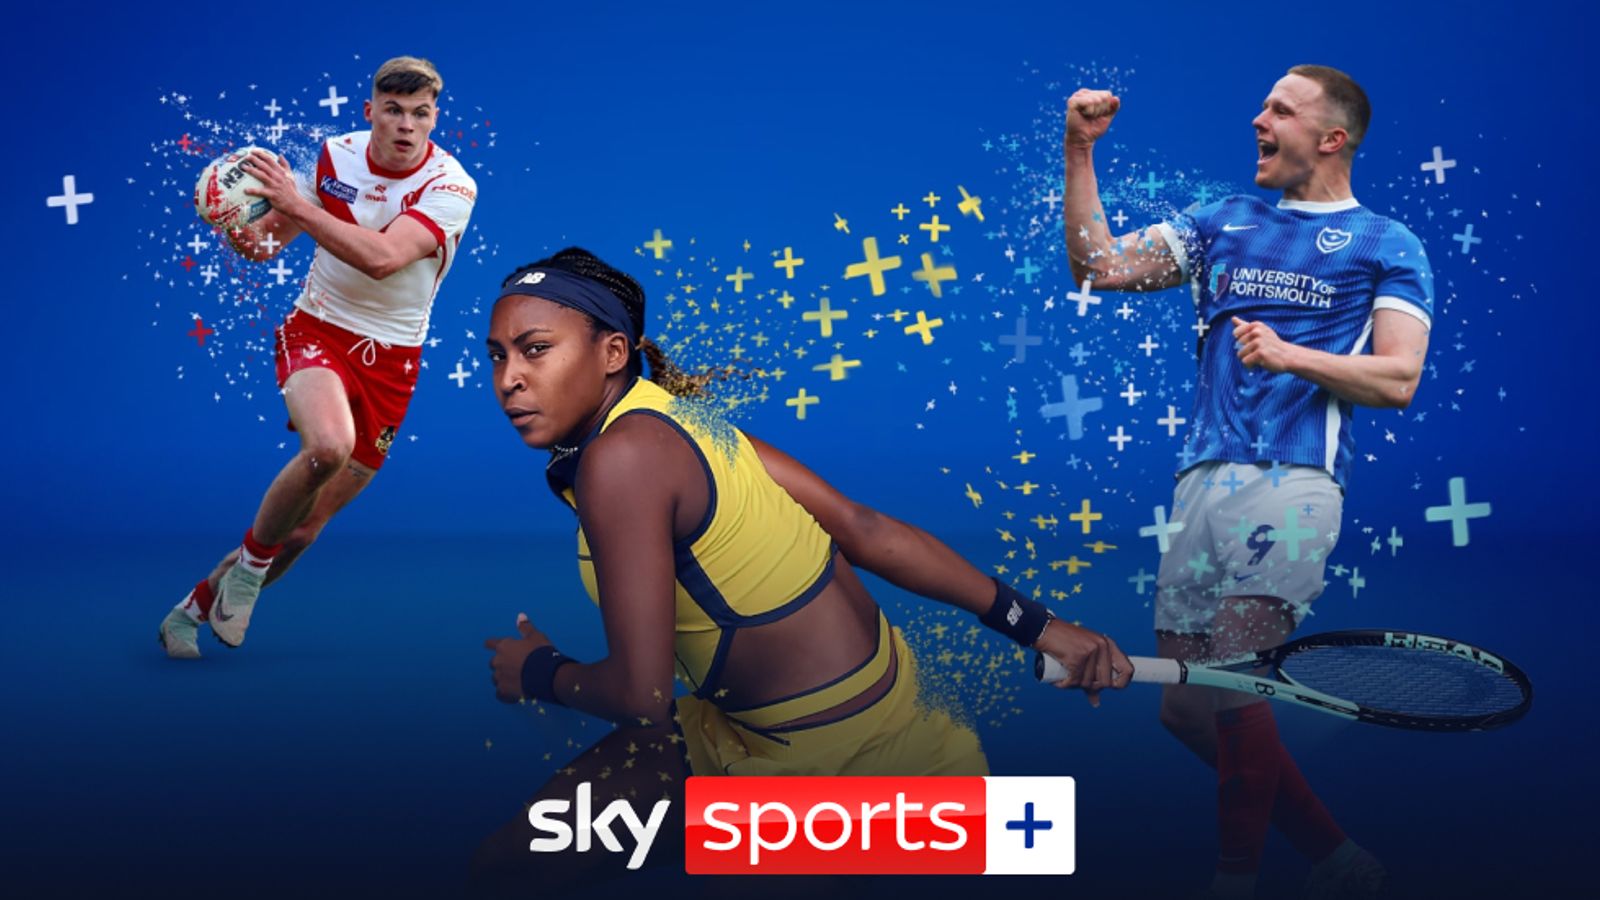 'Next level sports viewing!' - Sky Sports+ to launch on Thursday